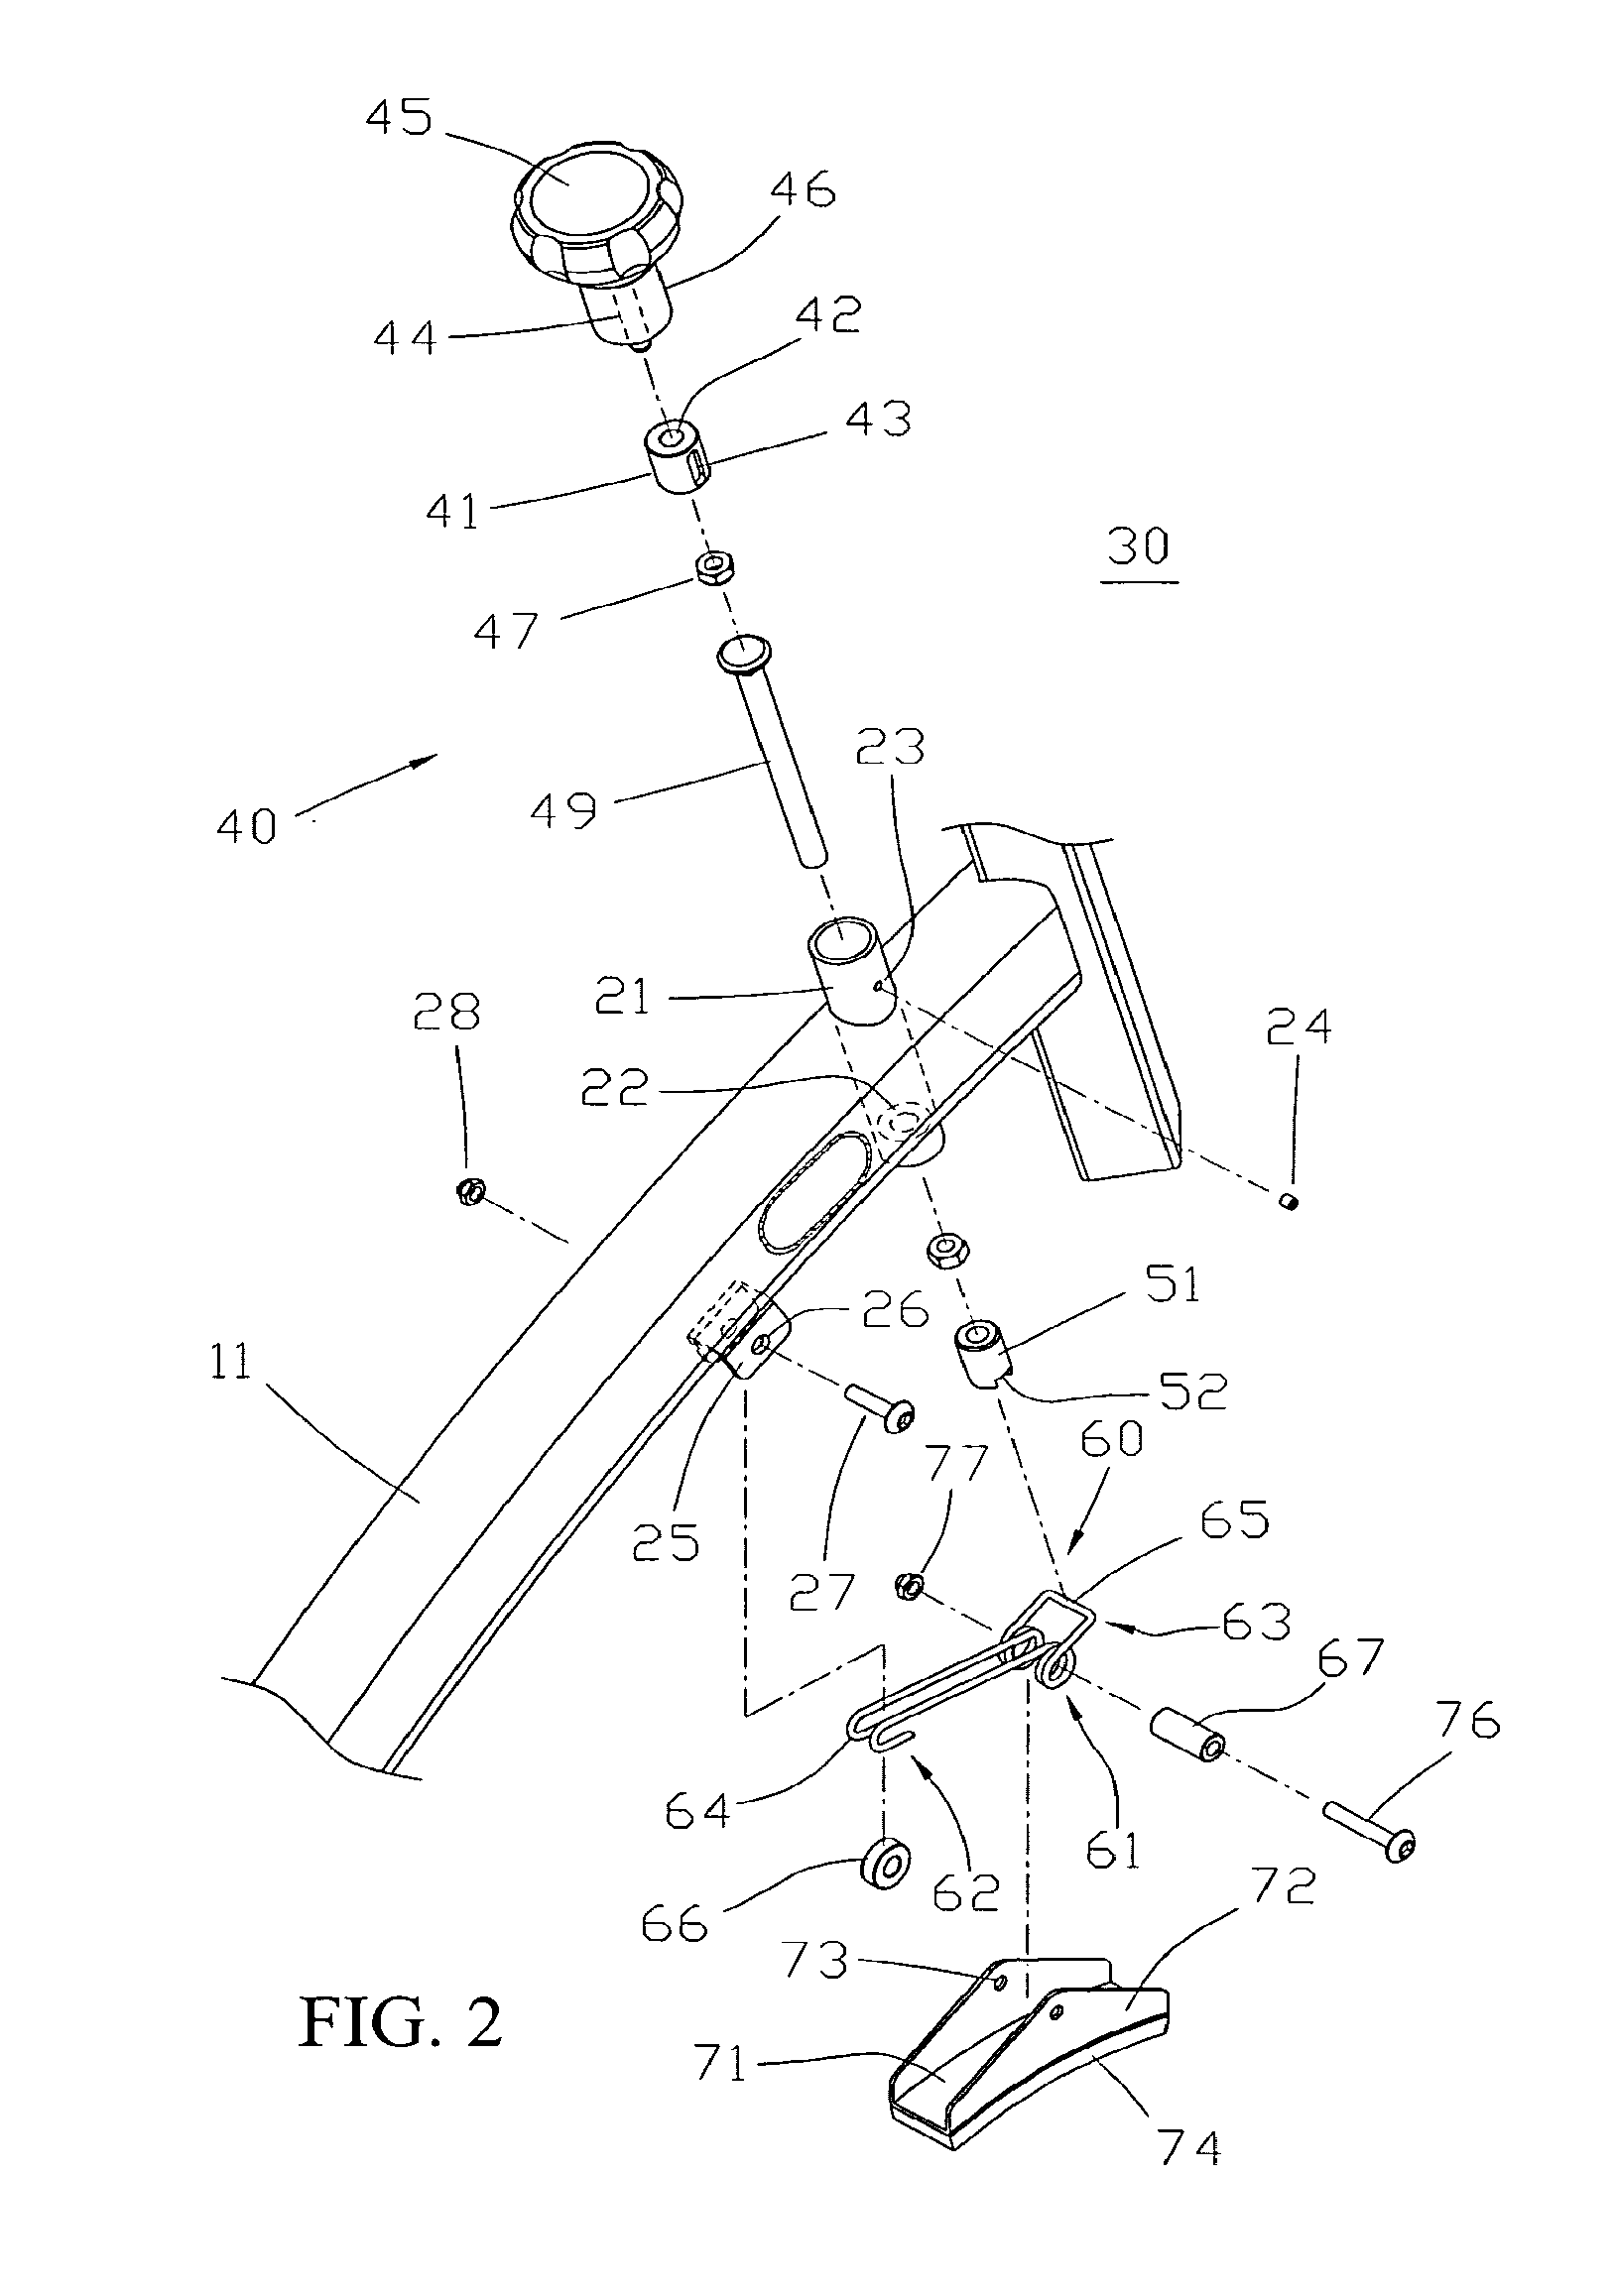 Exercise apparatus with adjustable resistance assembly